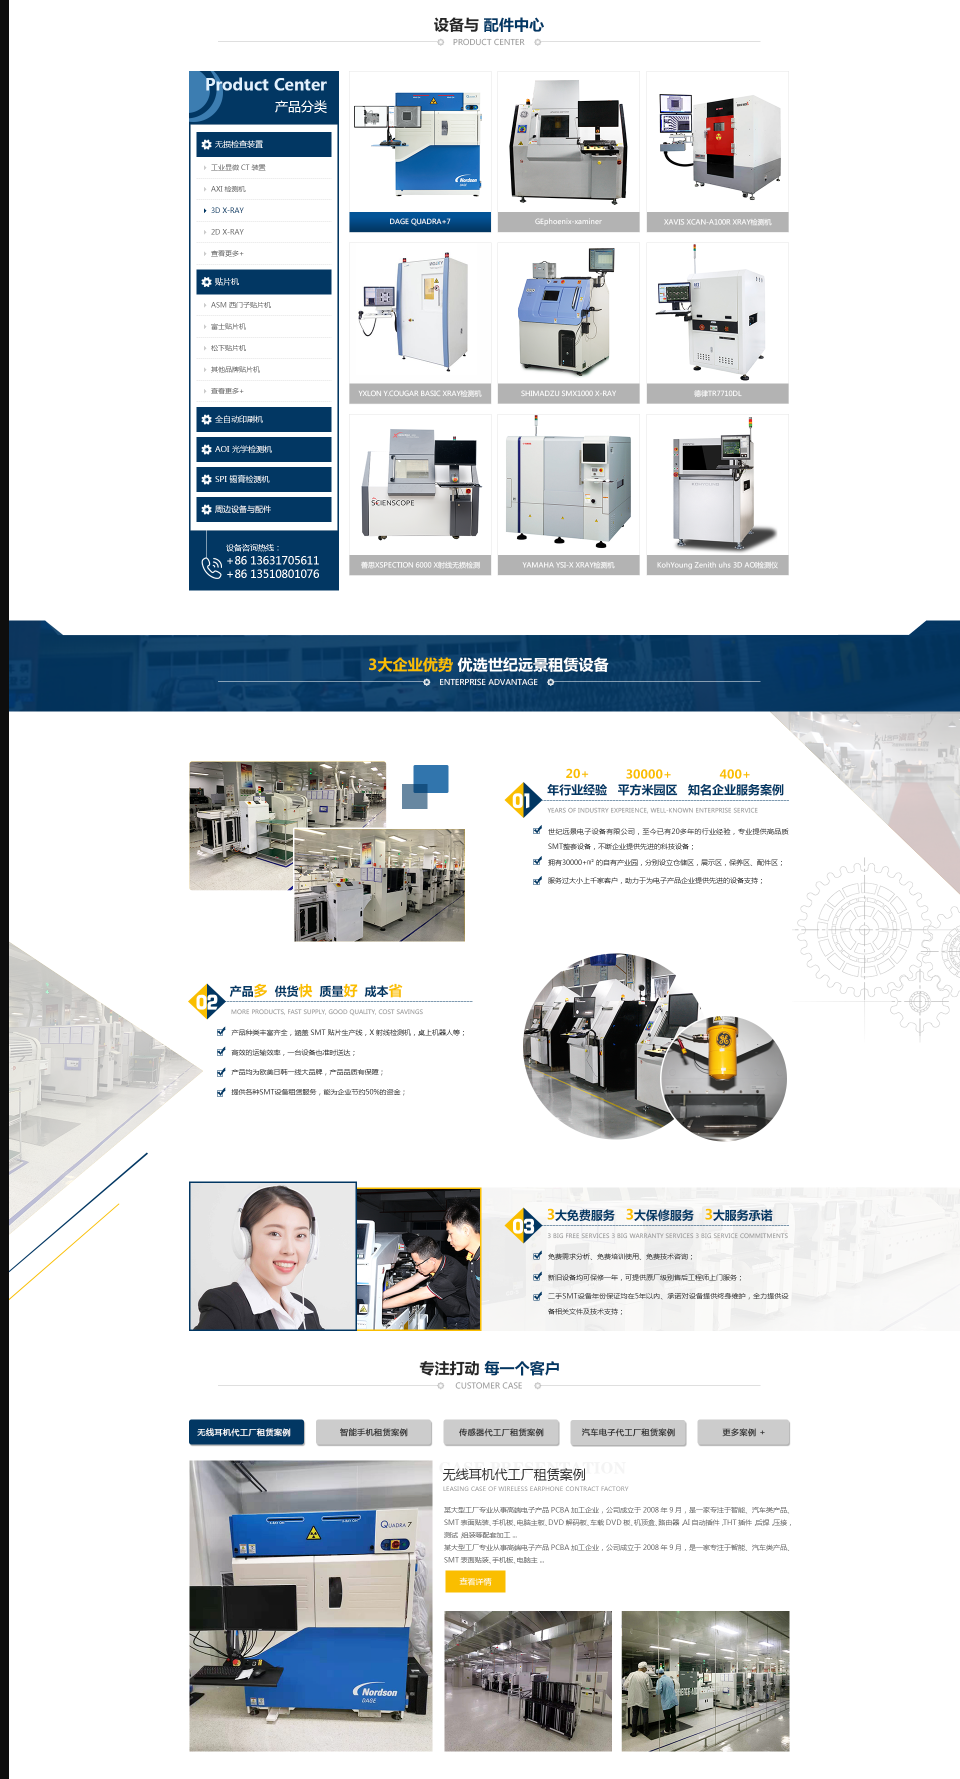 X-ray detection equipment, X-ray detector, X-ray machine manufacturer, mature technology, welcome to call